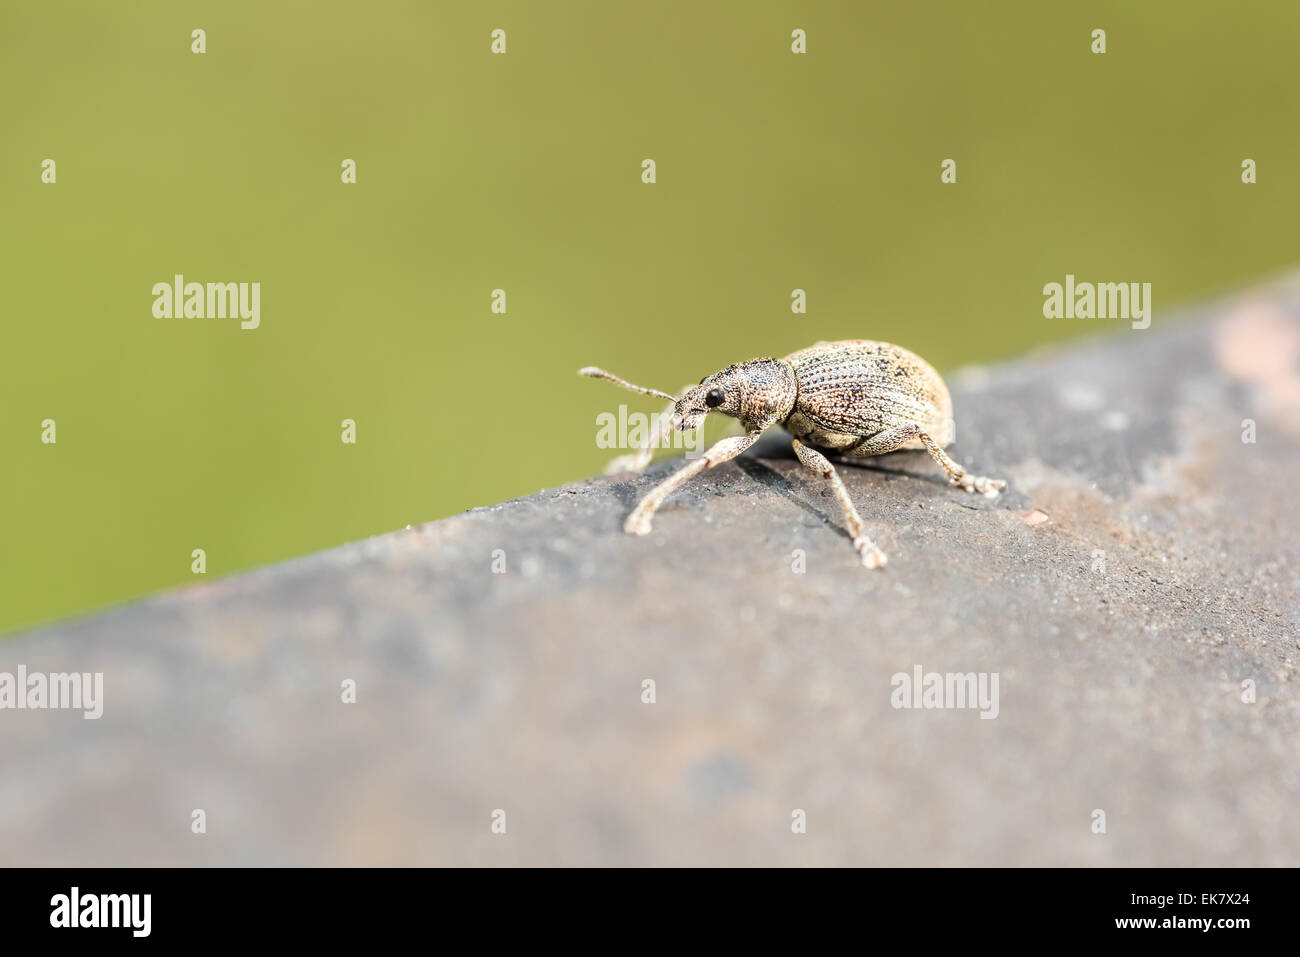 Weevil Beetle From Curculionoidea Superfamily Is A Small, Herbivorous Insect Stock Photo